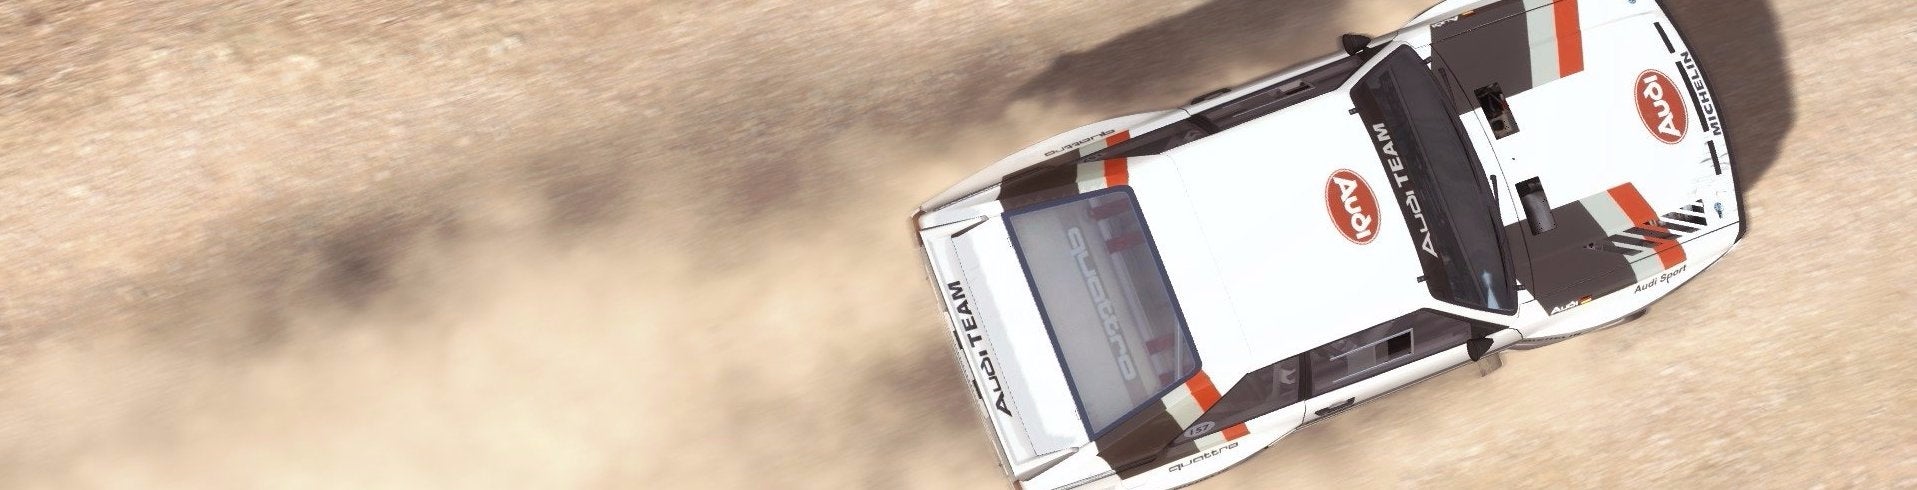 Image for Dirt Rally could well be Codemasters' first real sim